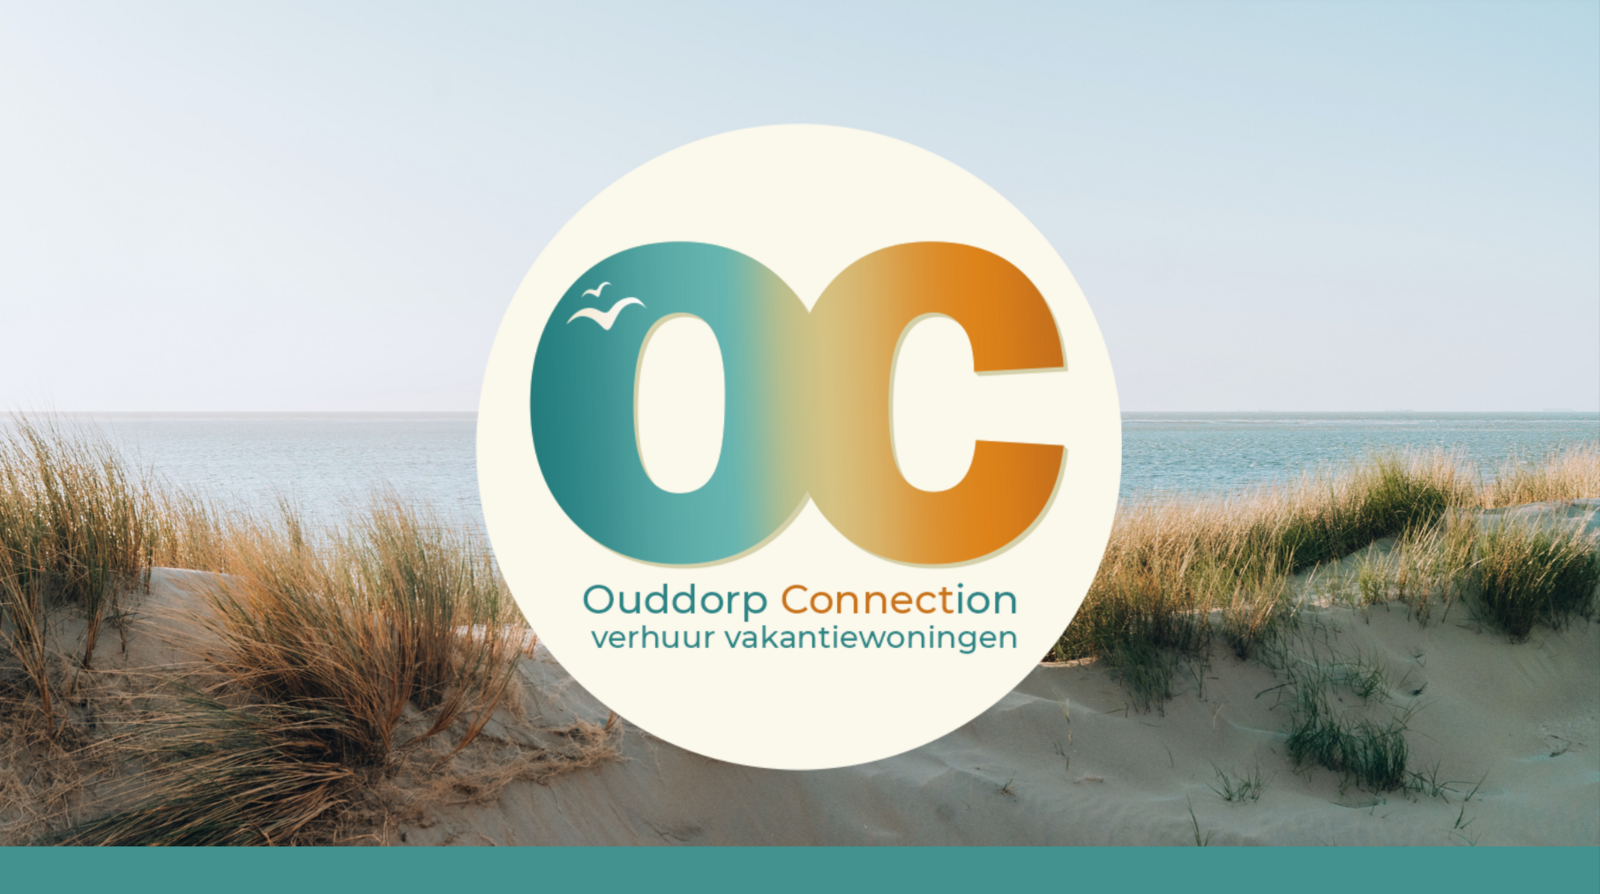 Office - Visiting address Ouddorp Connection